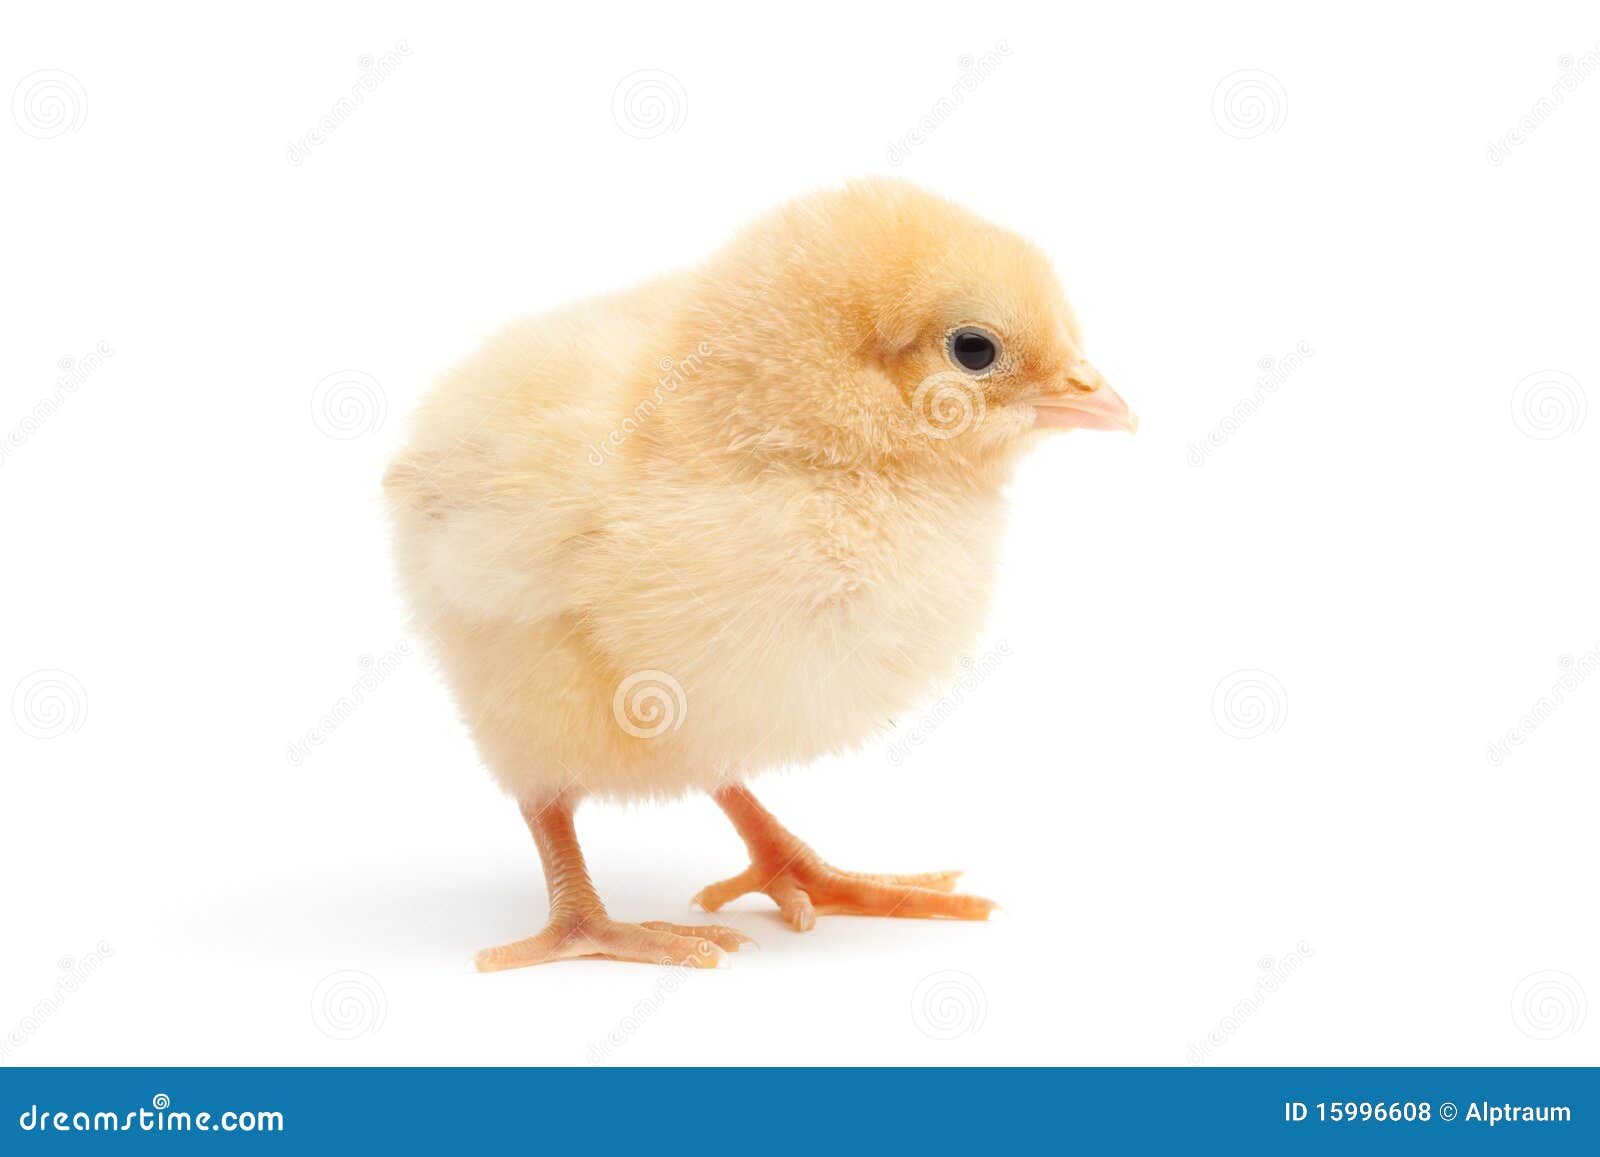 cute chick  on white